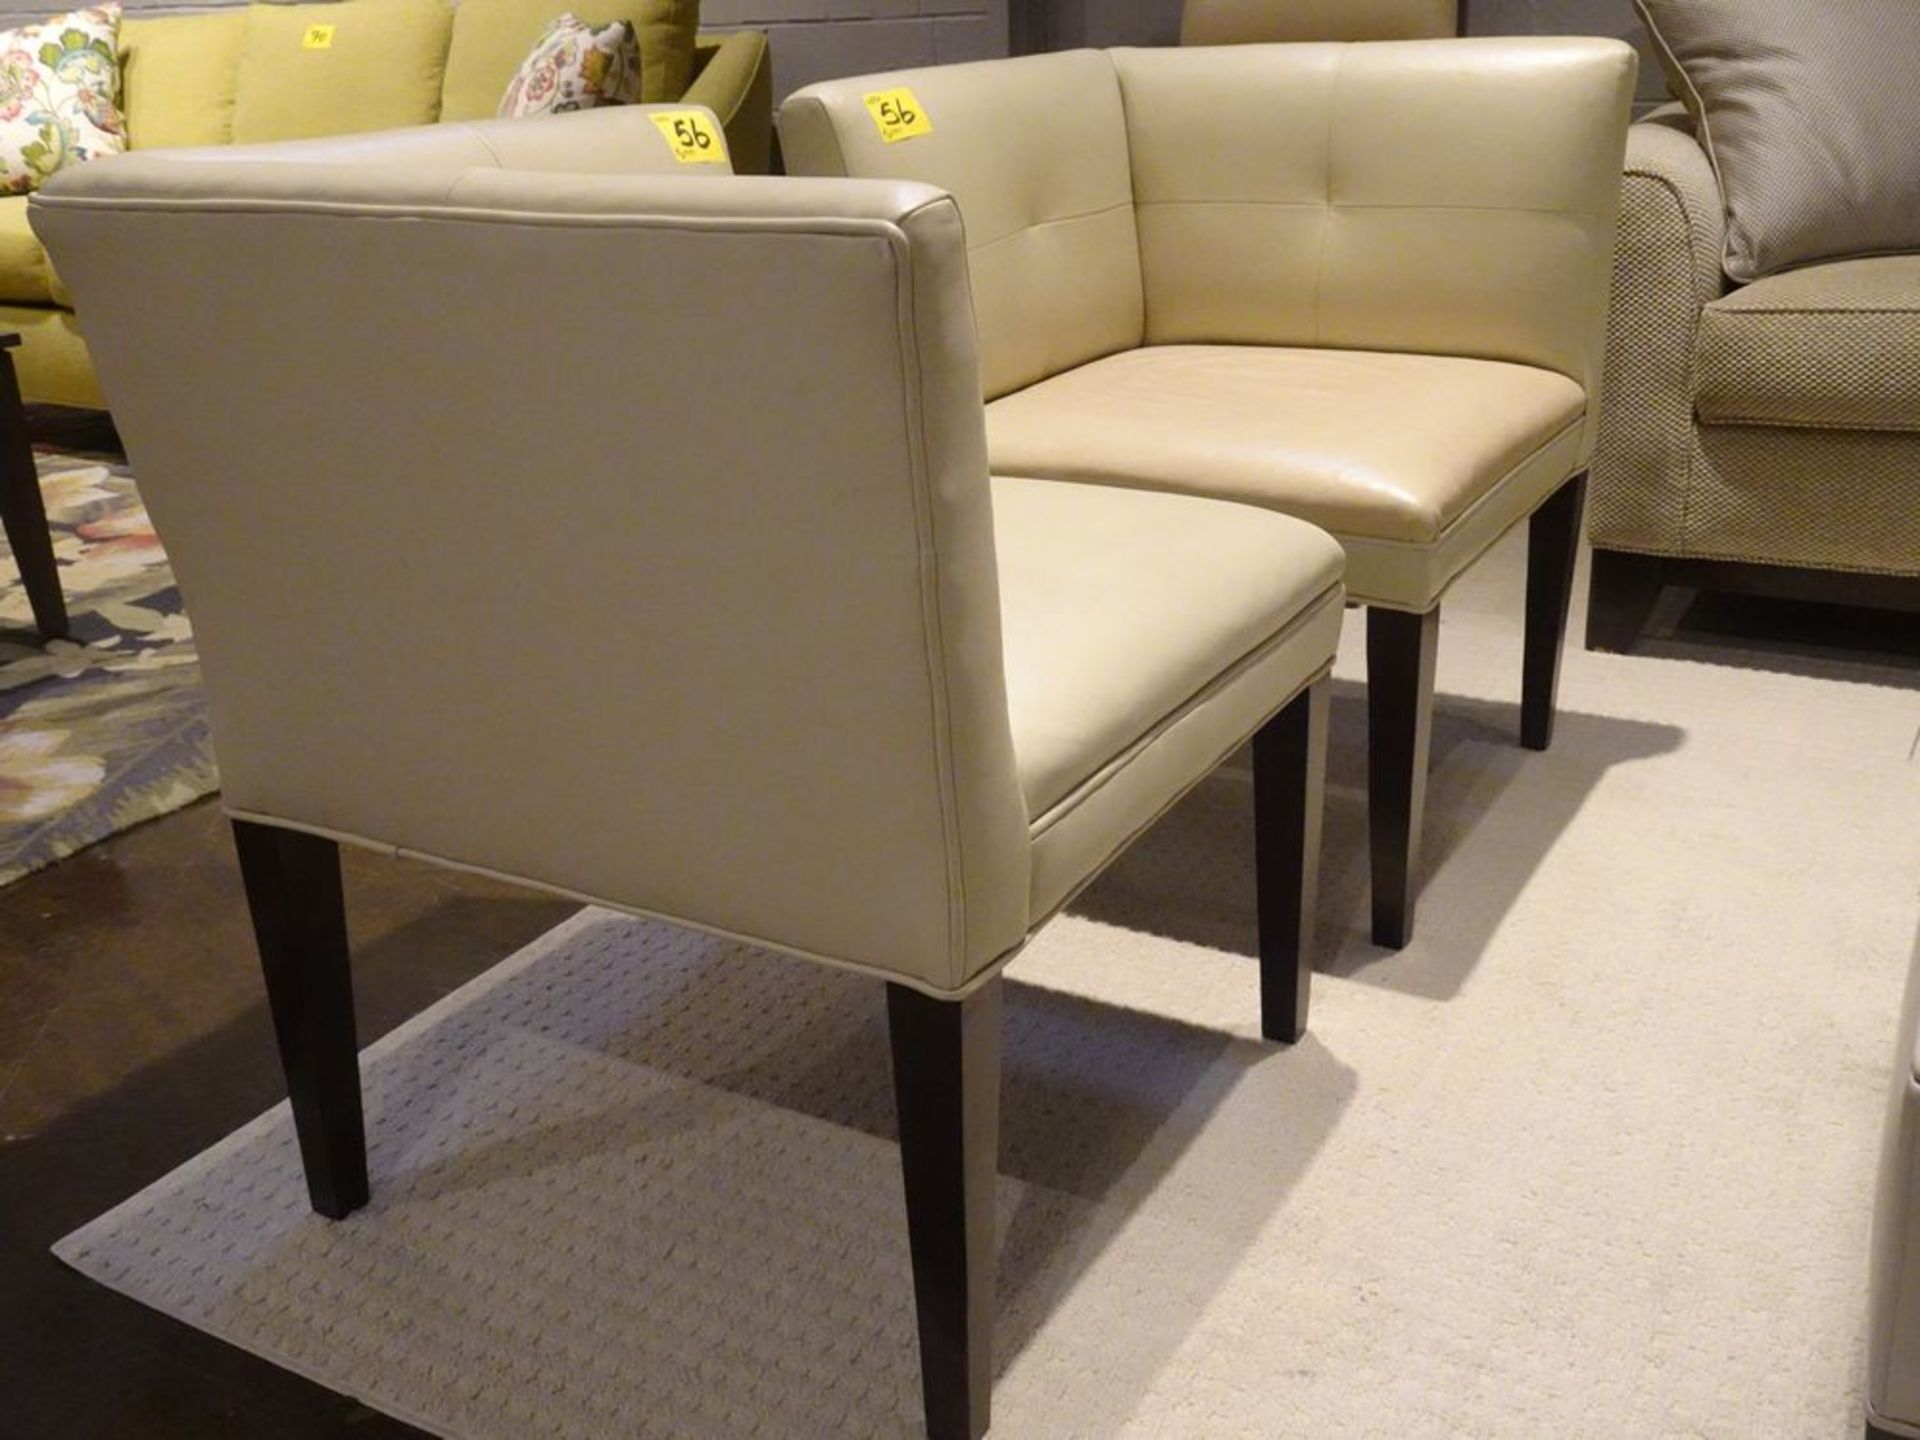 PAIR OF BEIGE LEATHER CORNER CHAIRS (SLIGHT COLOR CHANGE IN CUSHIONS) - Image 2 of 3